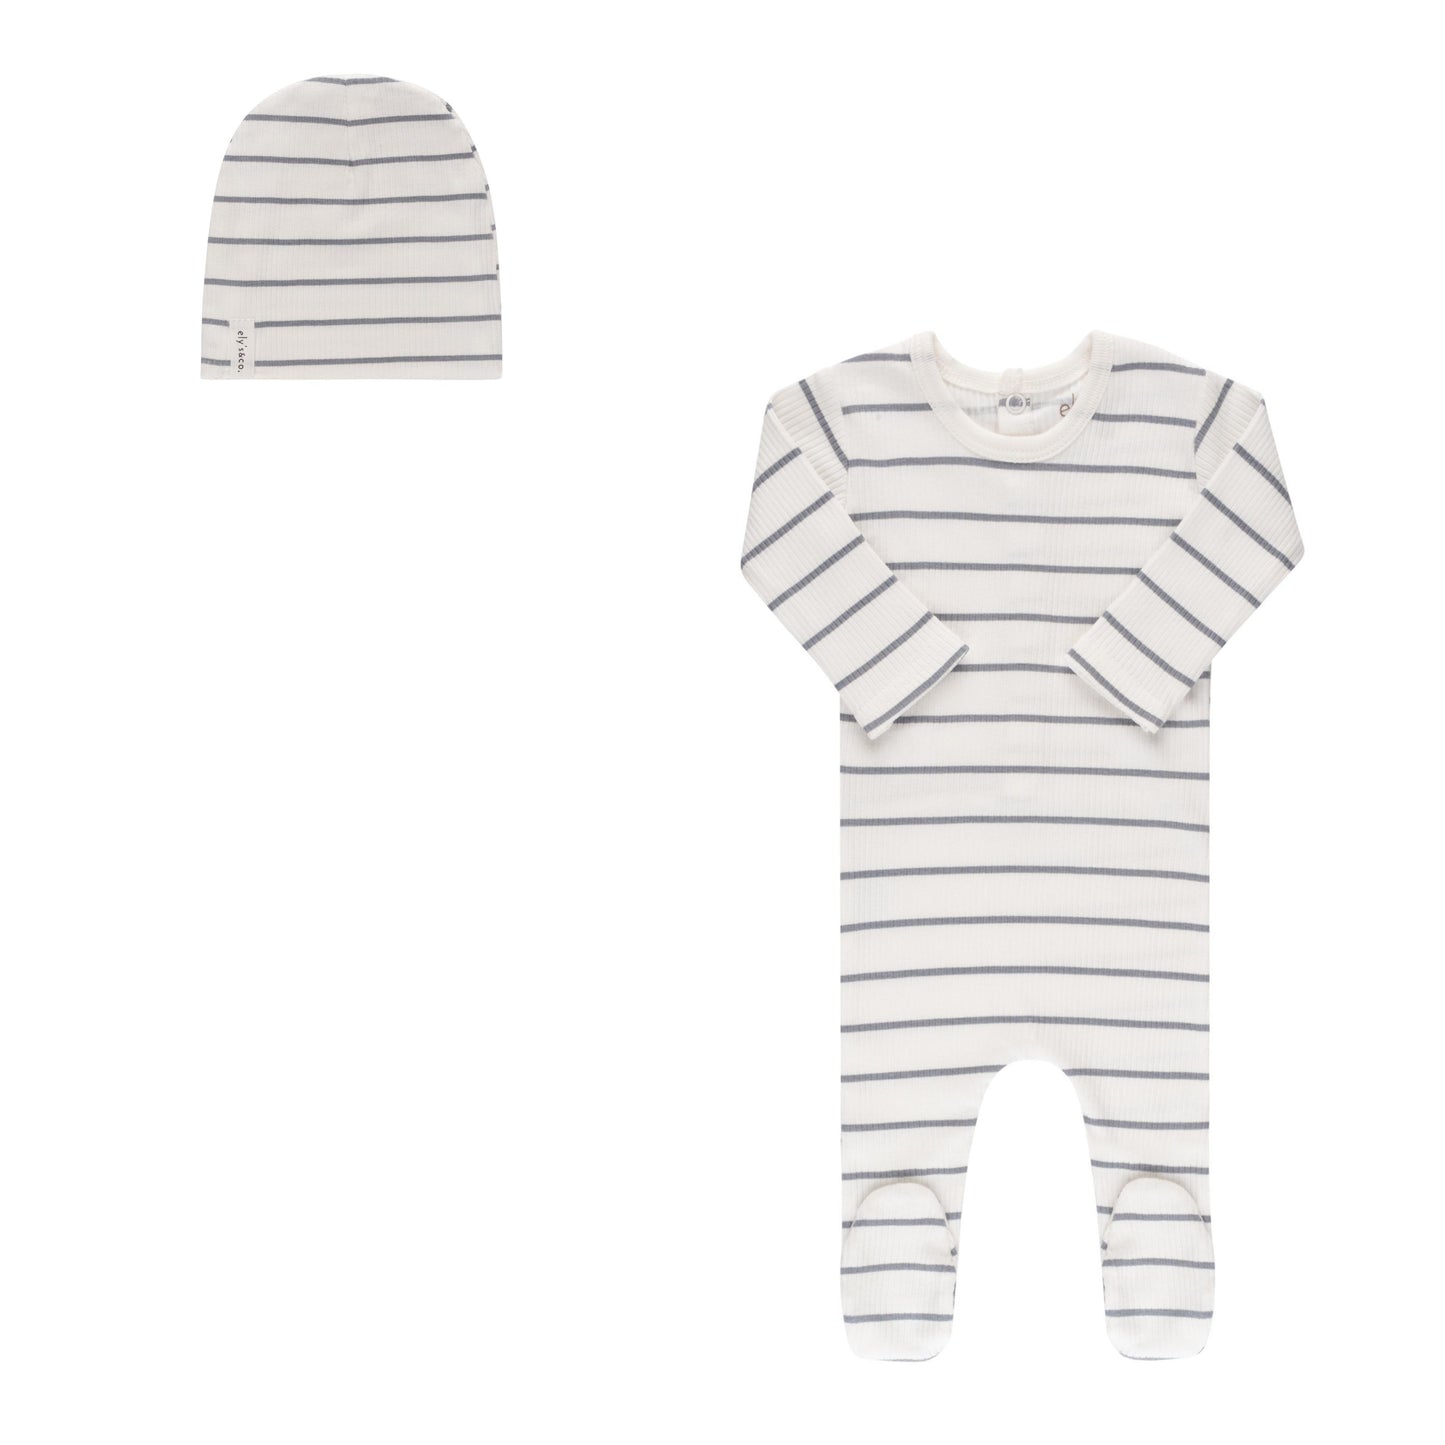 Ely's & Co Wide Stripe Ribbed Collection